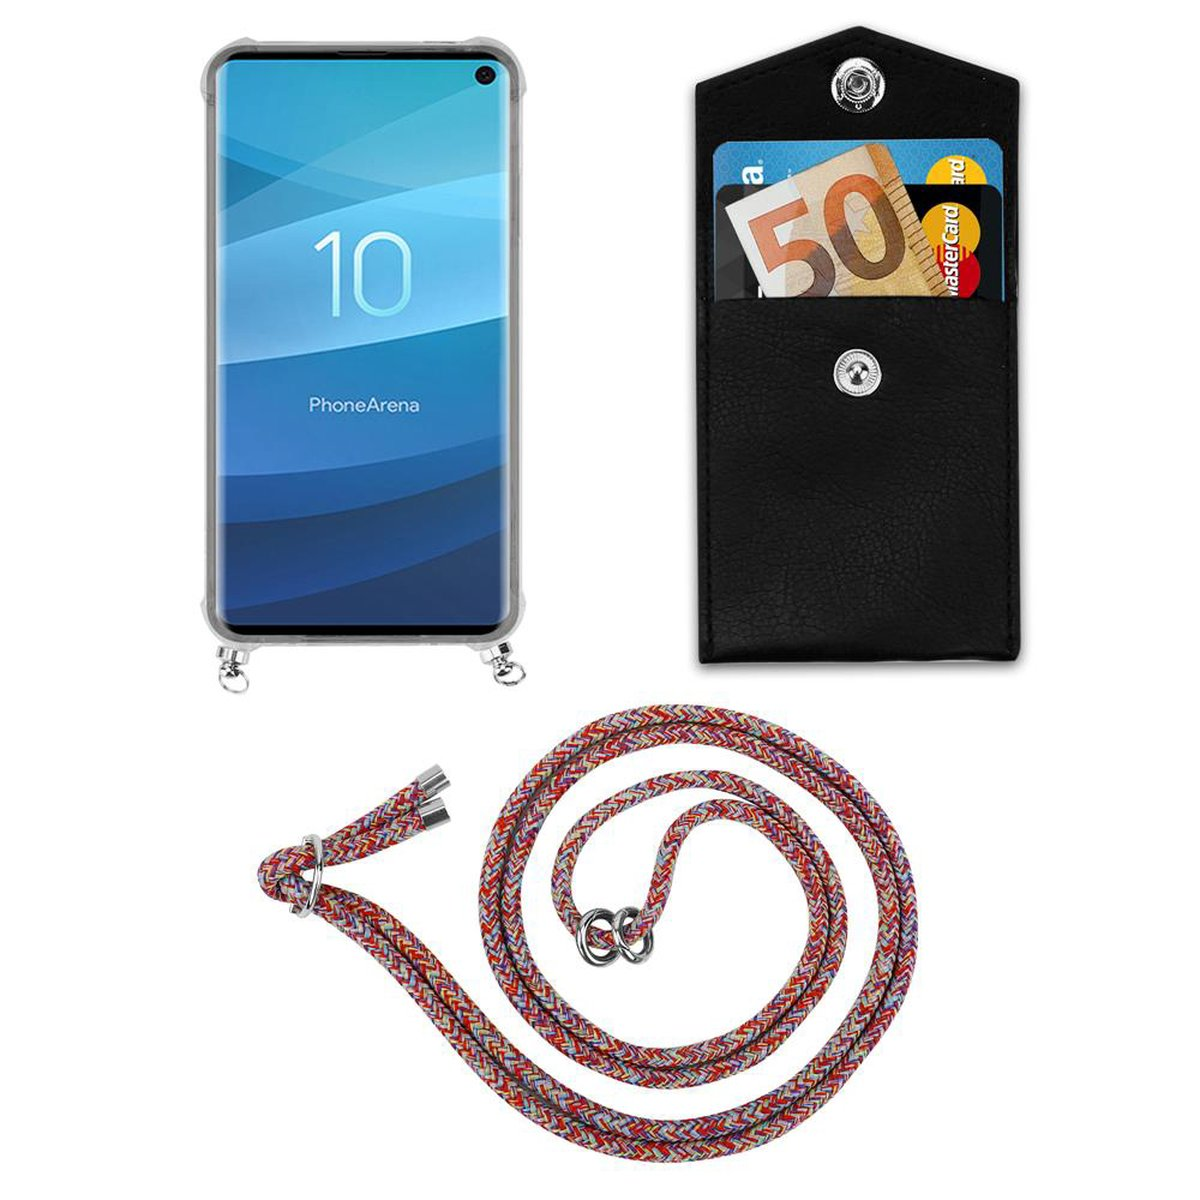 CADORABO Handy Kette mit Backcover, Galaxy abnehmbarer Hülle, COLORFUL Silber Kordel Samsung, 4G, Band Ringen, PARROT und S10